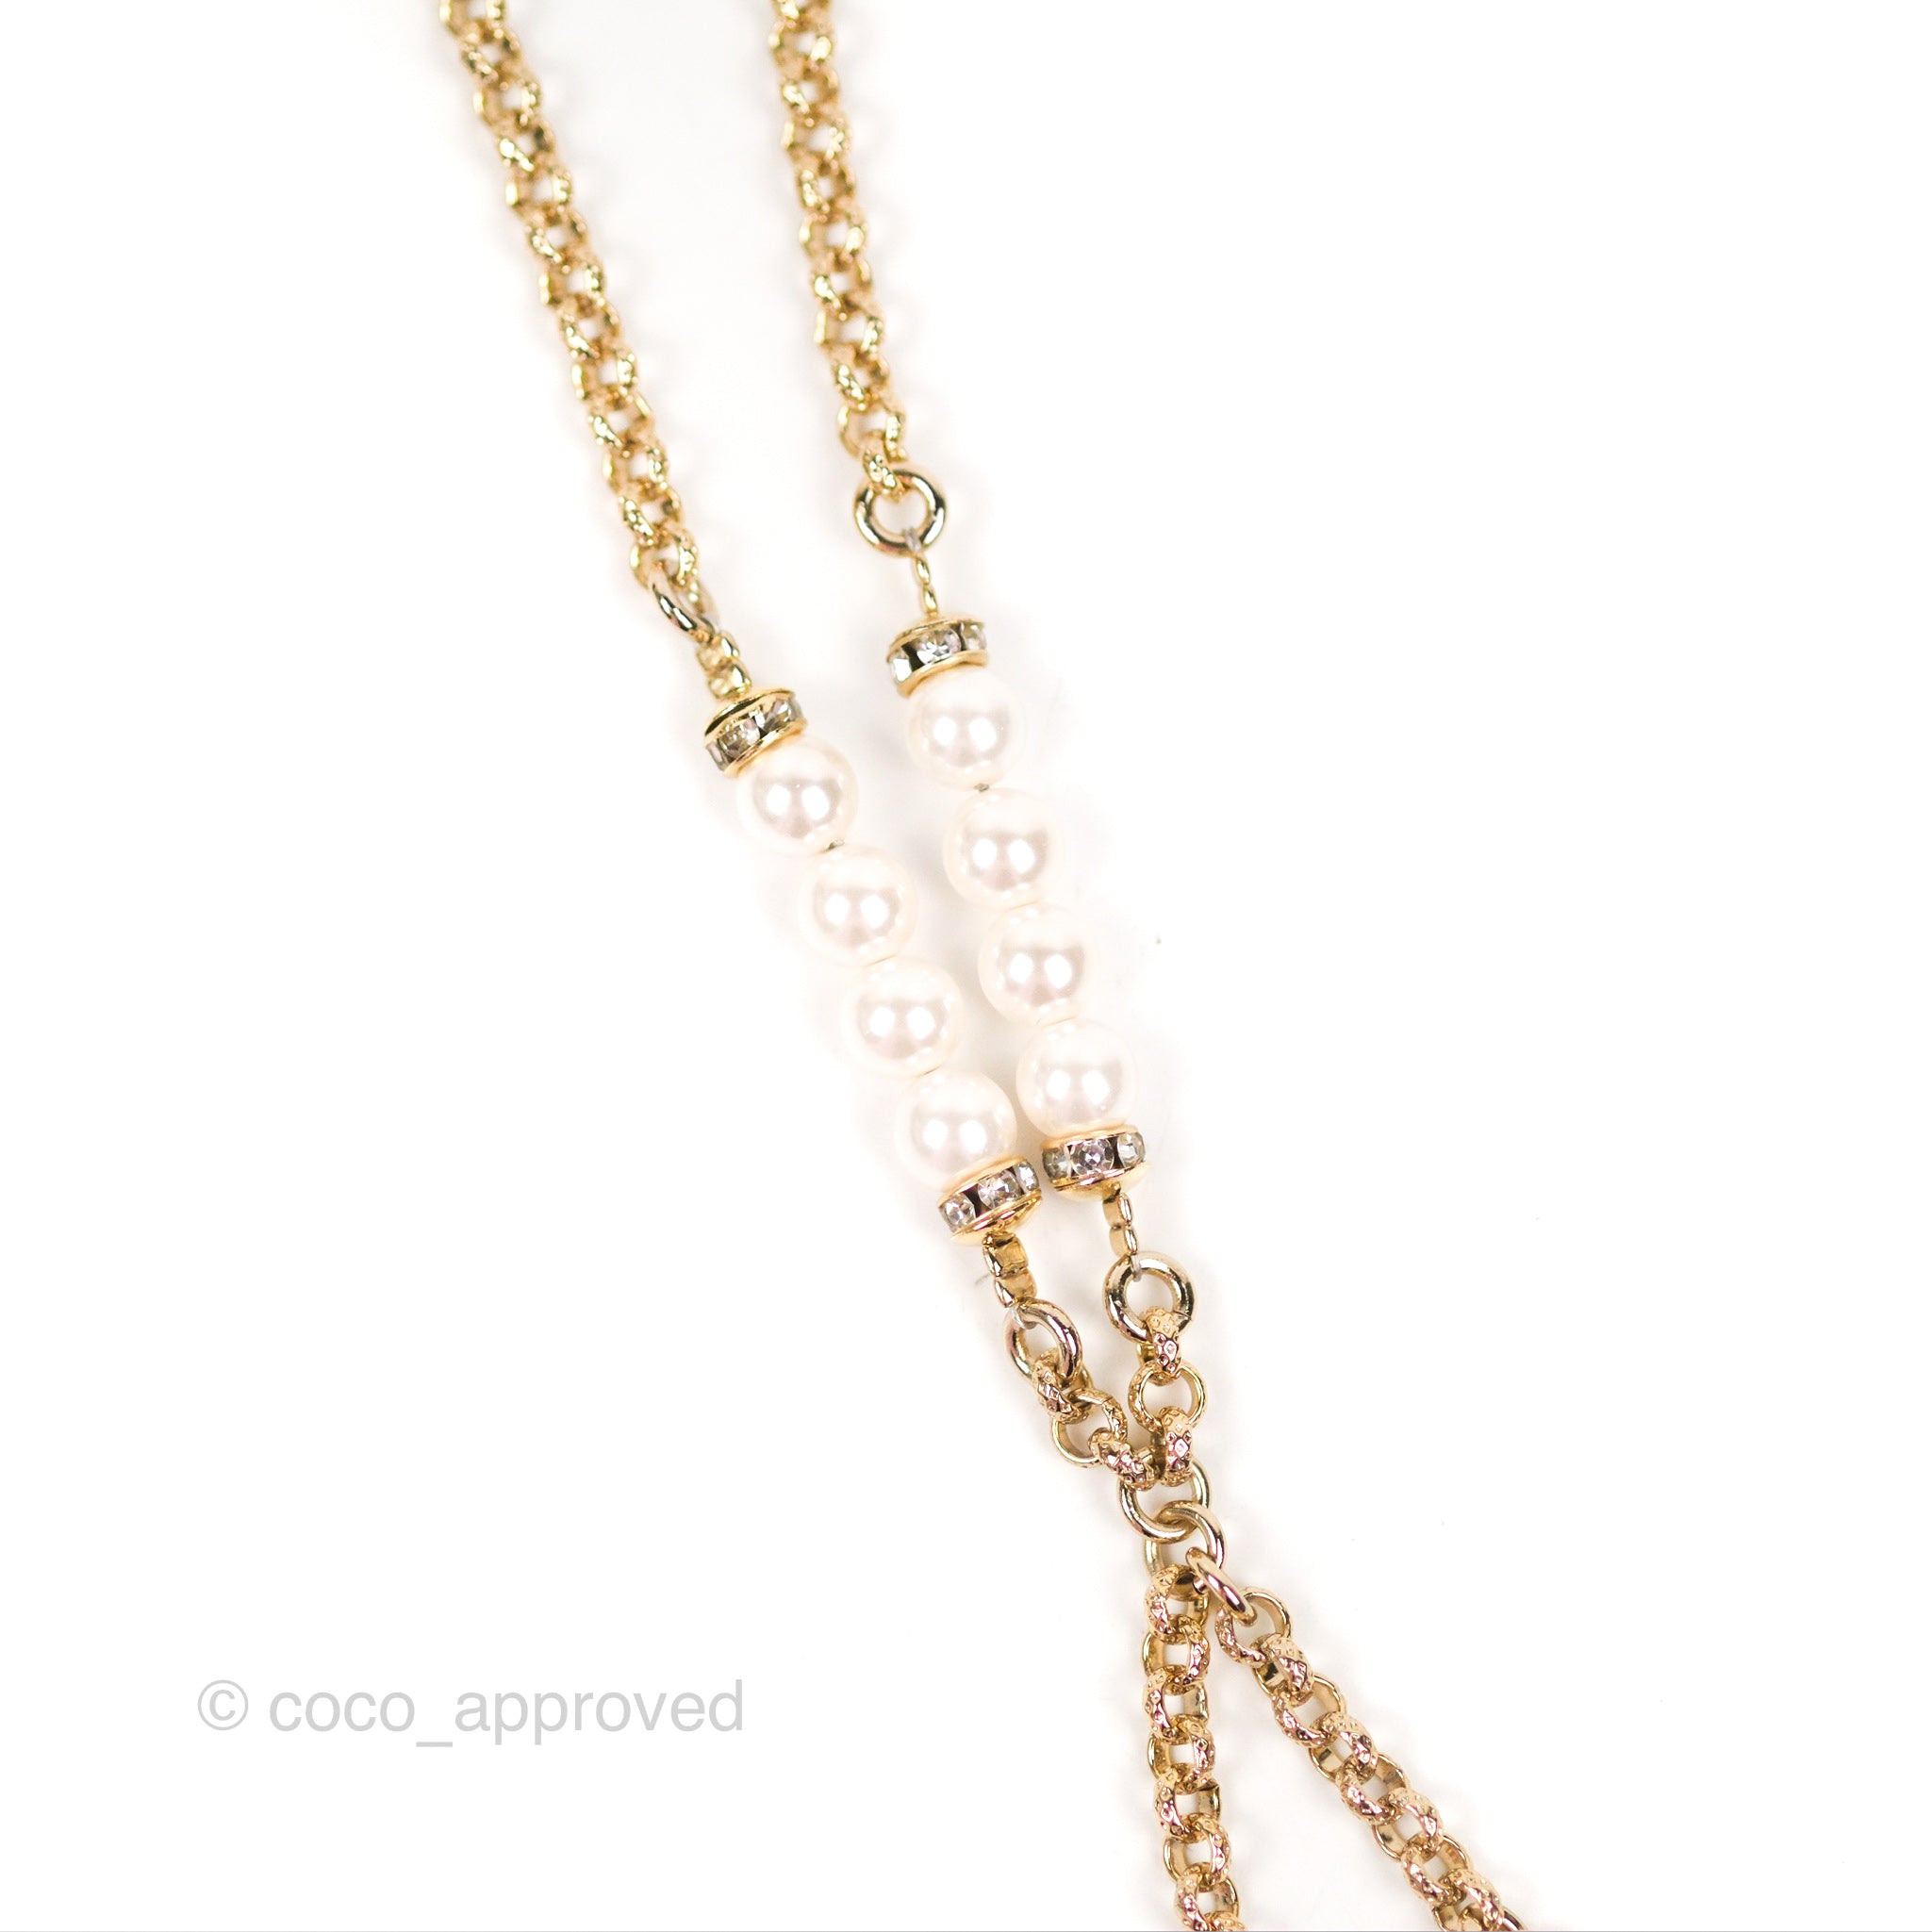 Sold at Auction: Vntg CHANEL Pearl & CC Logo Long Chain Necklace